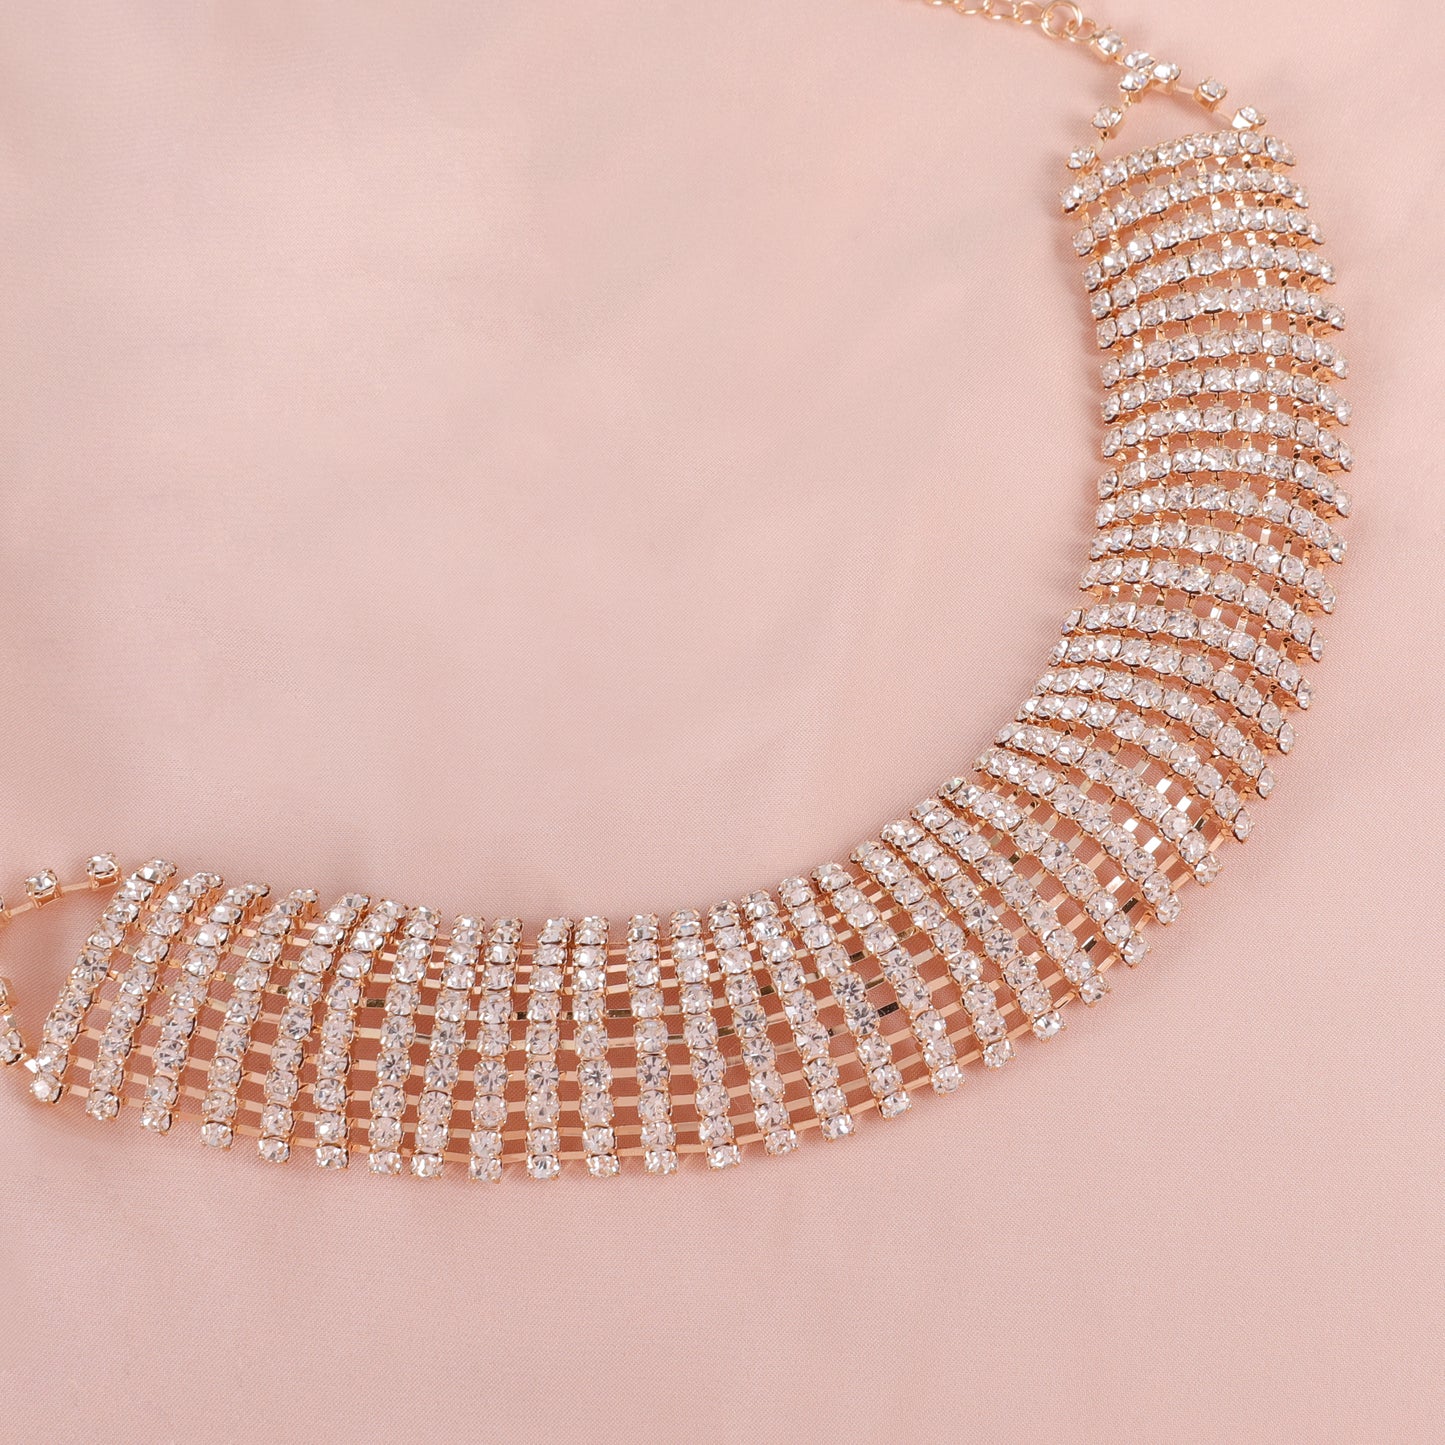 Lucy Curved Rhinestone Choker Necklace & Earring Set